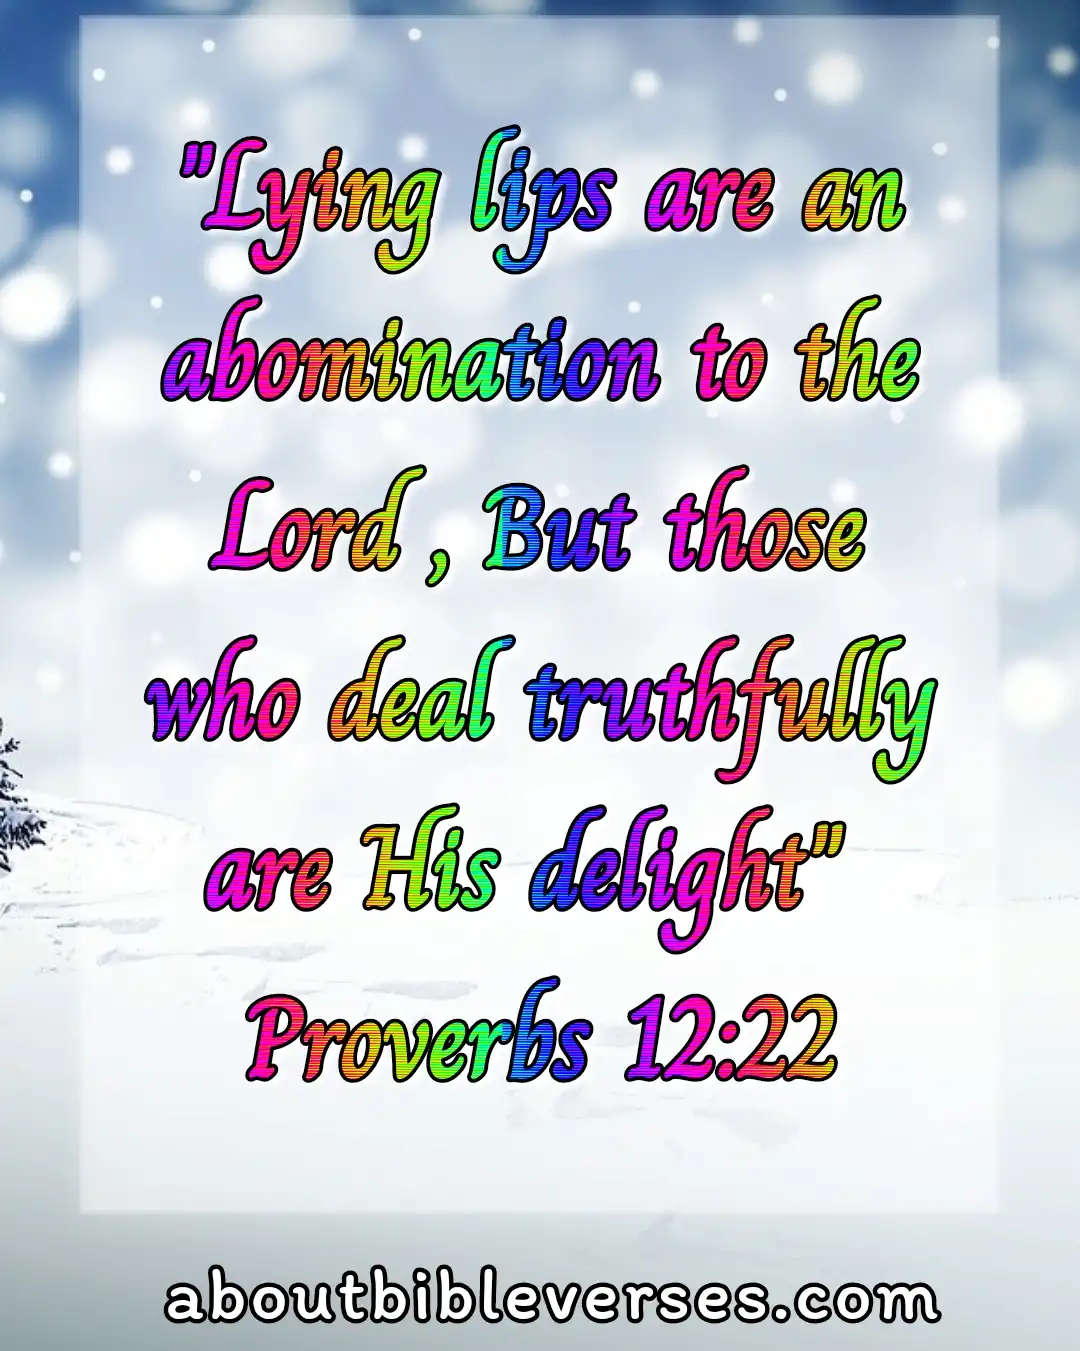 bible verses lying and deceit (Proverbs 12:22)